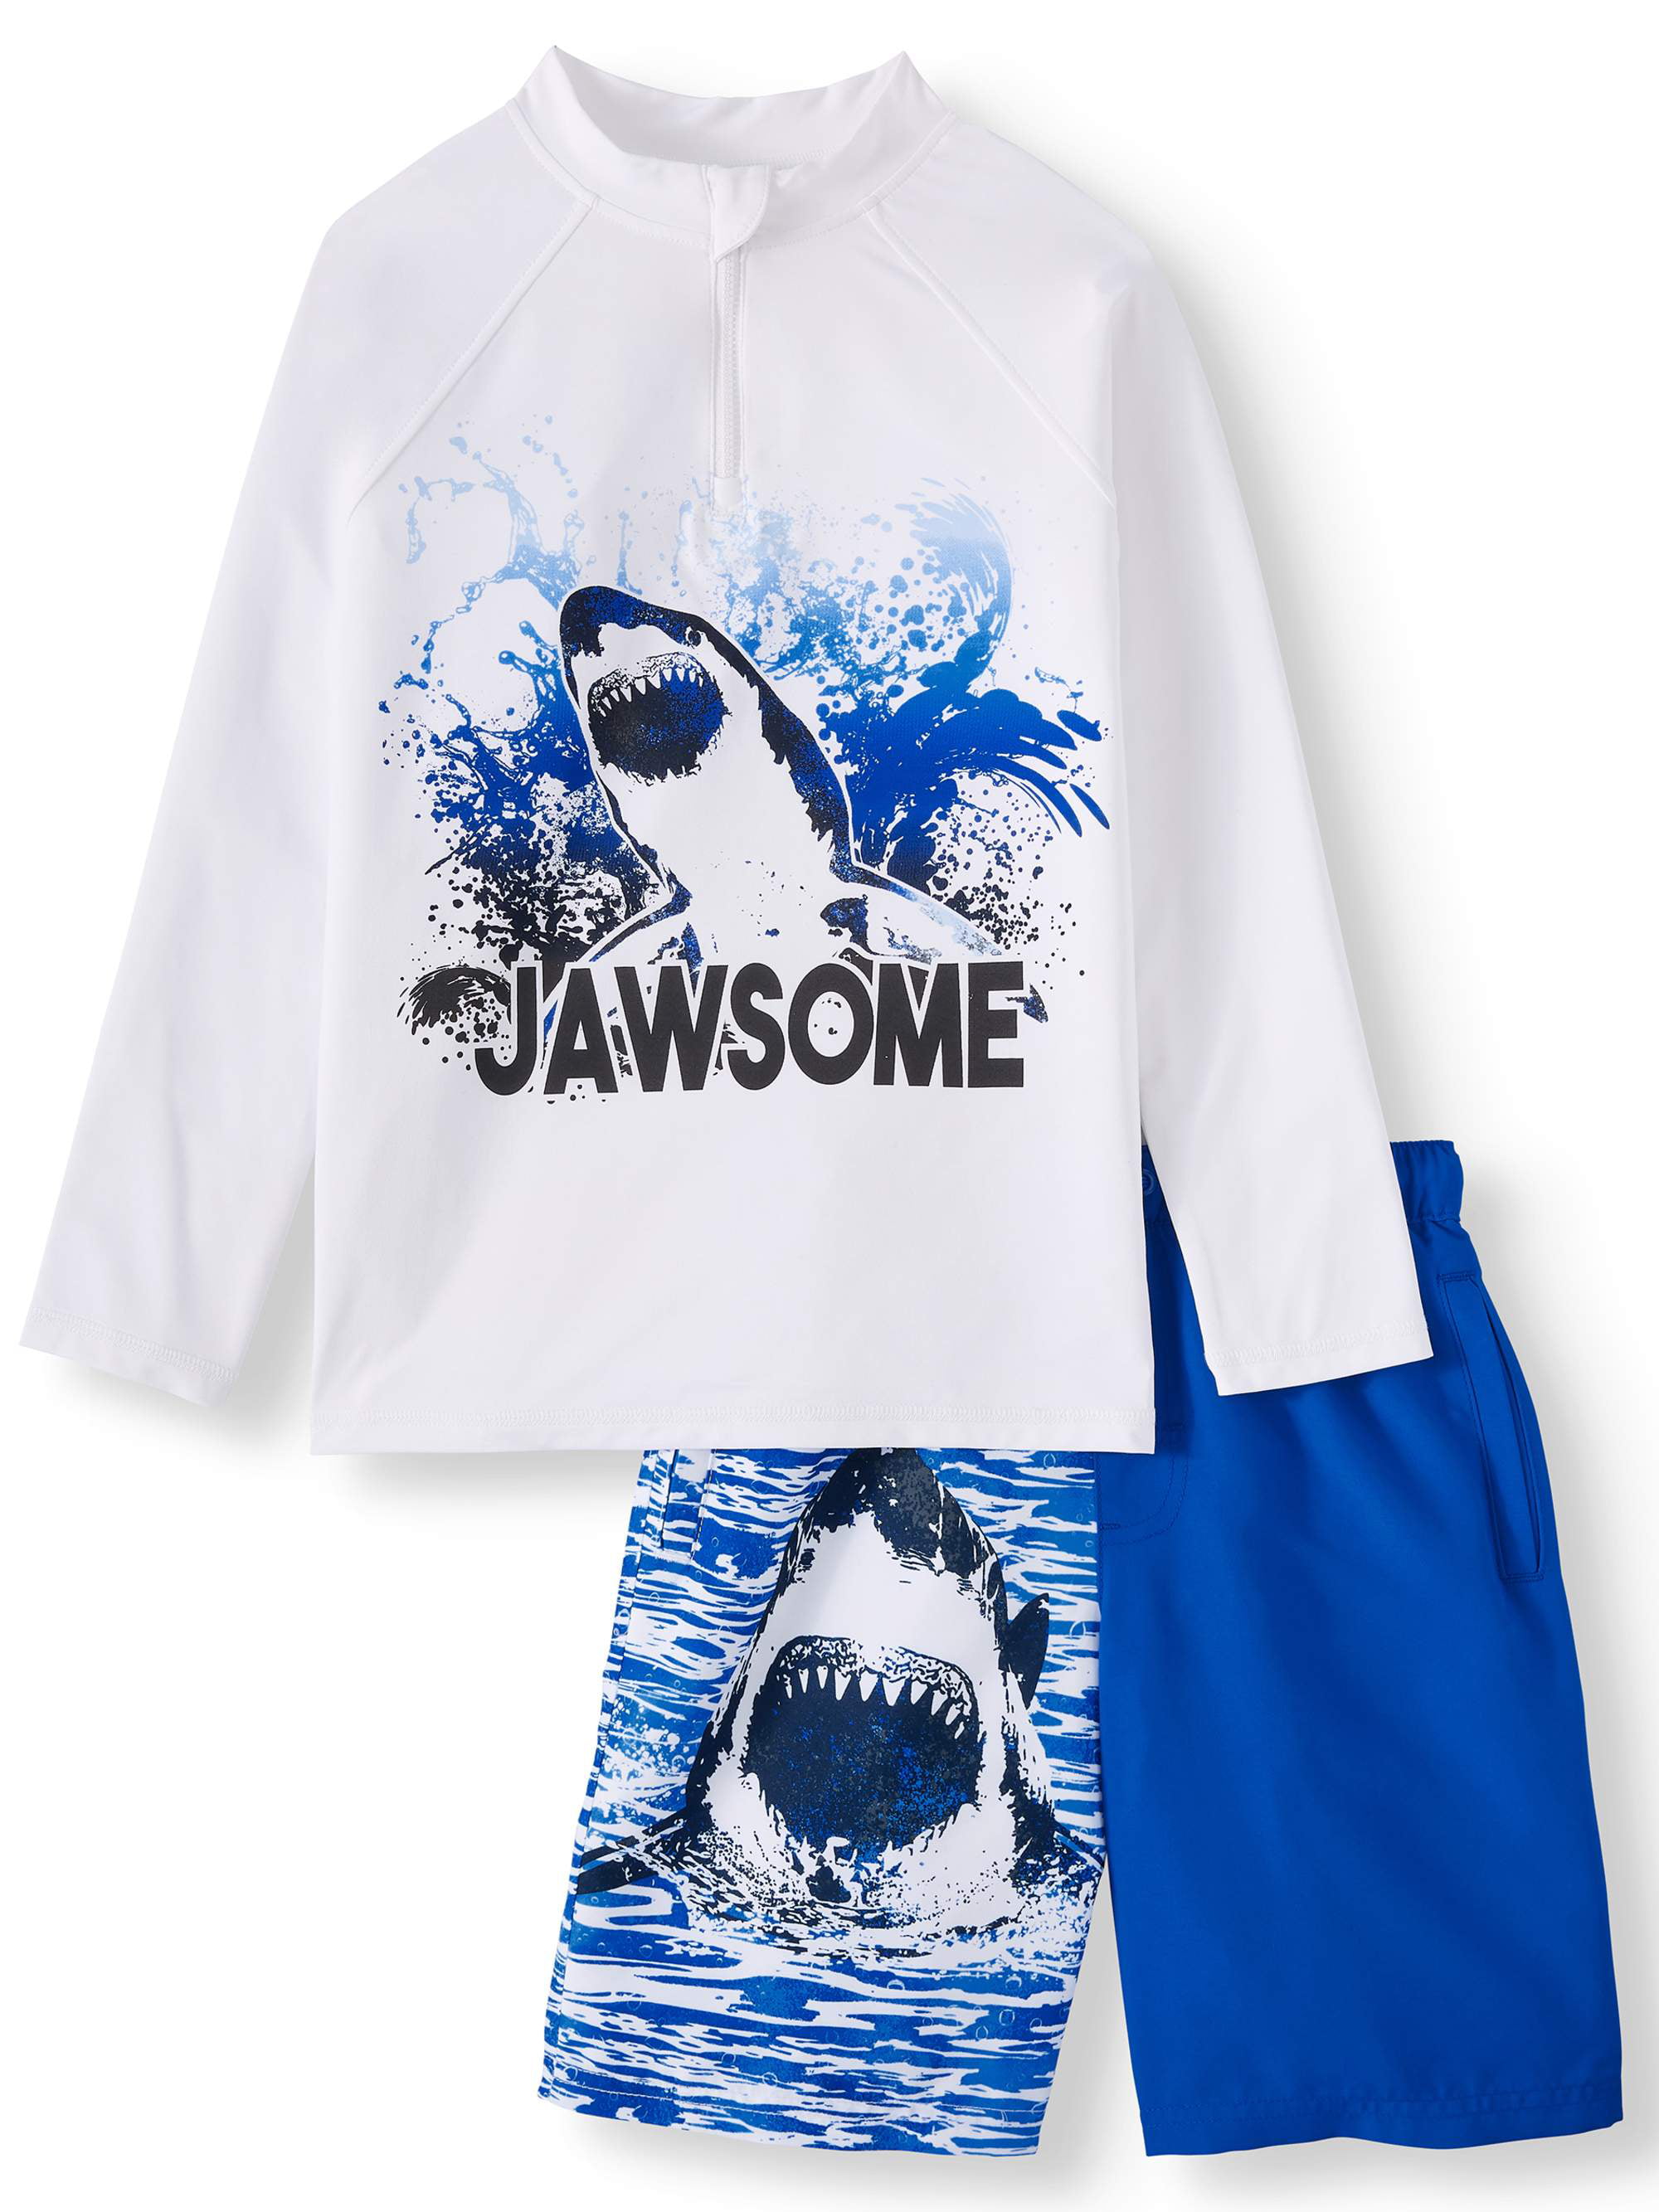 Pack of 2 Essentials Boys Long-Sleeve Rashguard and Trunk Swimsuit Sets 